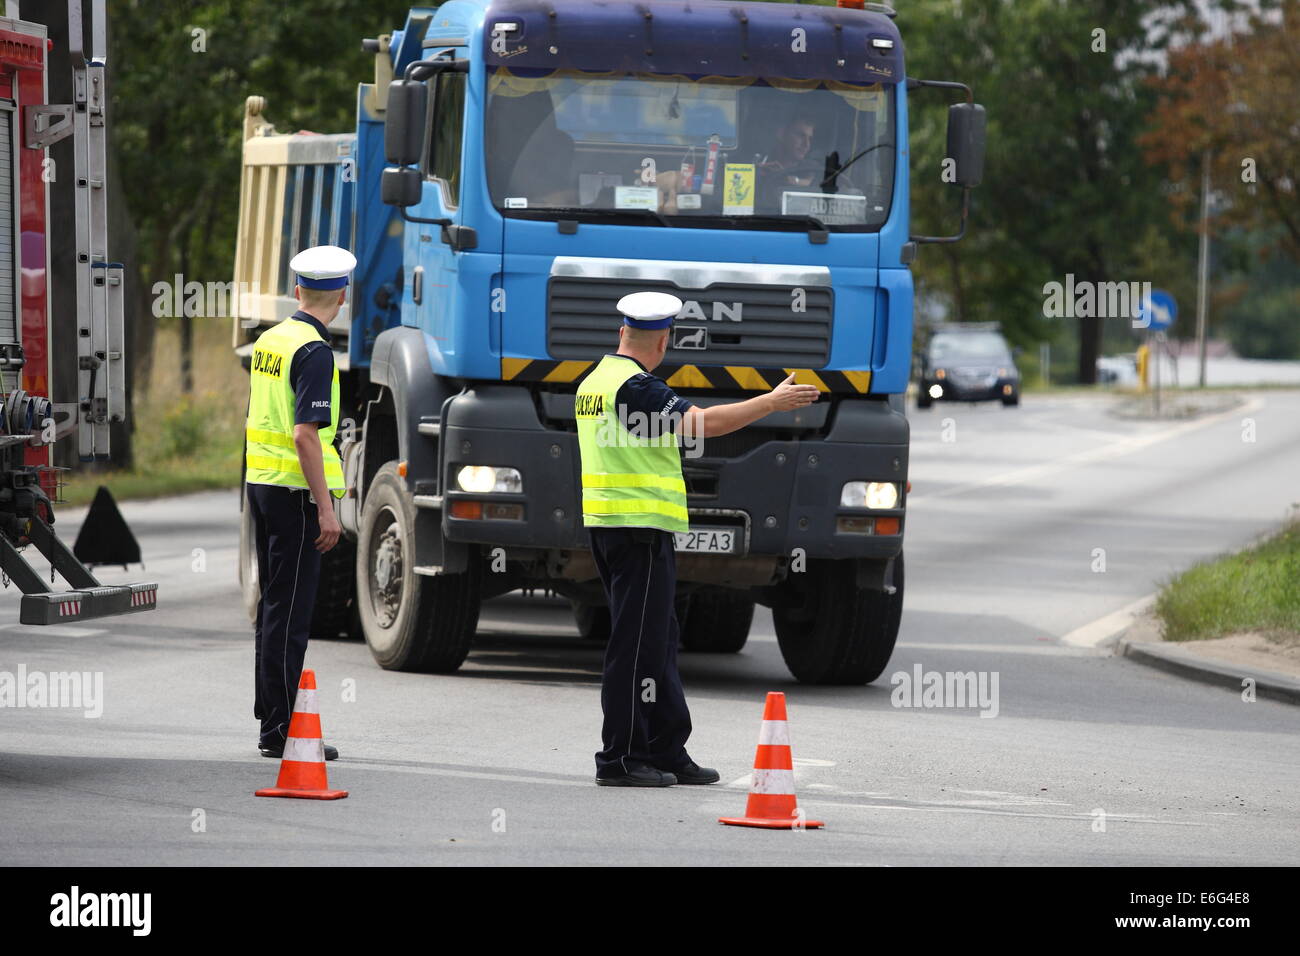 Gdansk, Poland 22nd, August 2014 72 y.o. man dead when his scooter hits the lorry on the crossroad in Kokoszki district of Gdansk. Police investigate on the crash site. Credit:  Michal Fludra/Alamy Live News Stock Photo